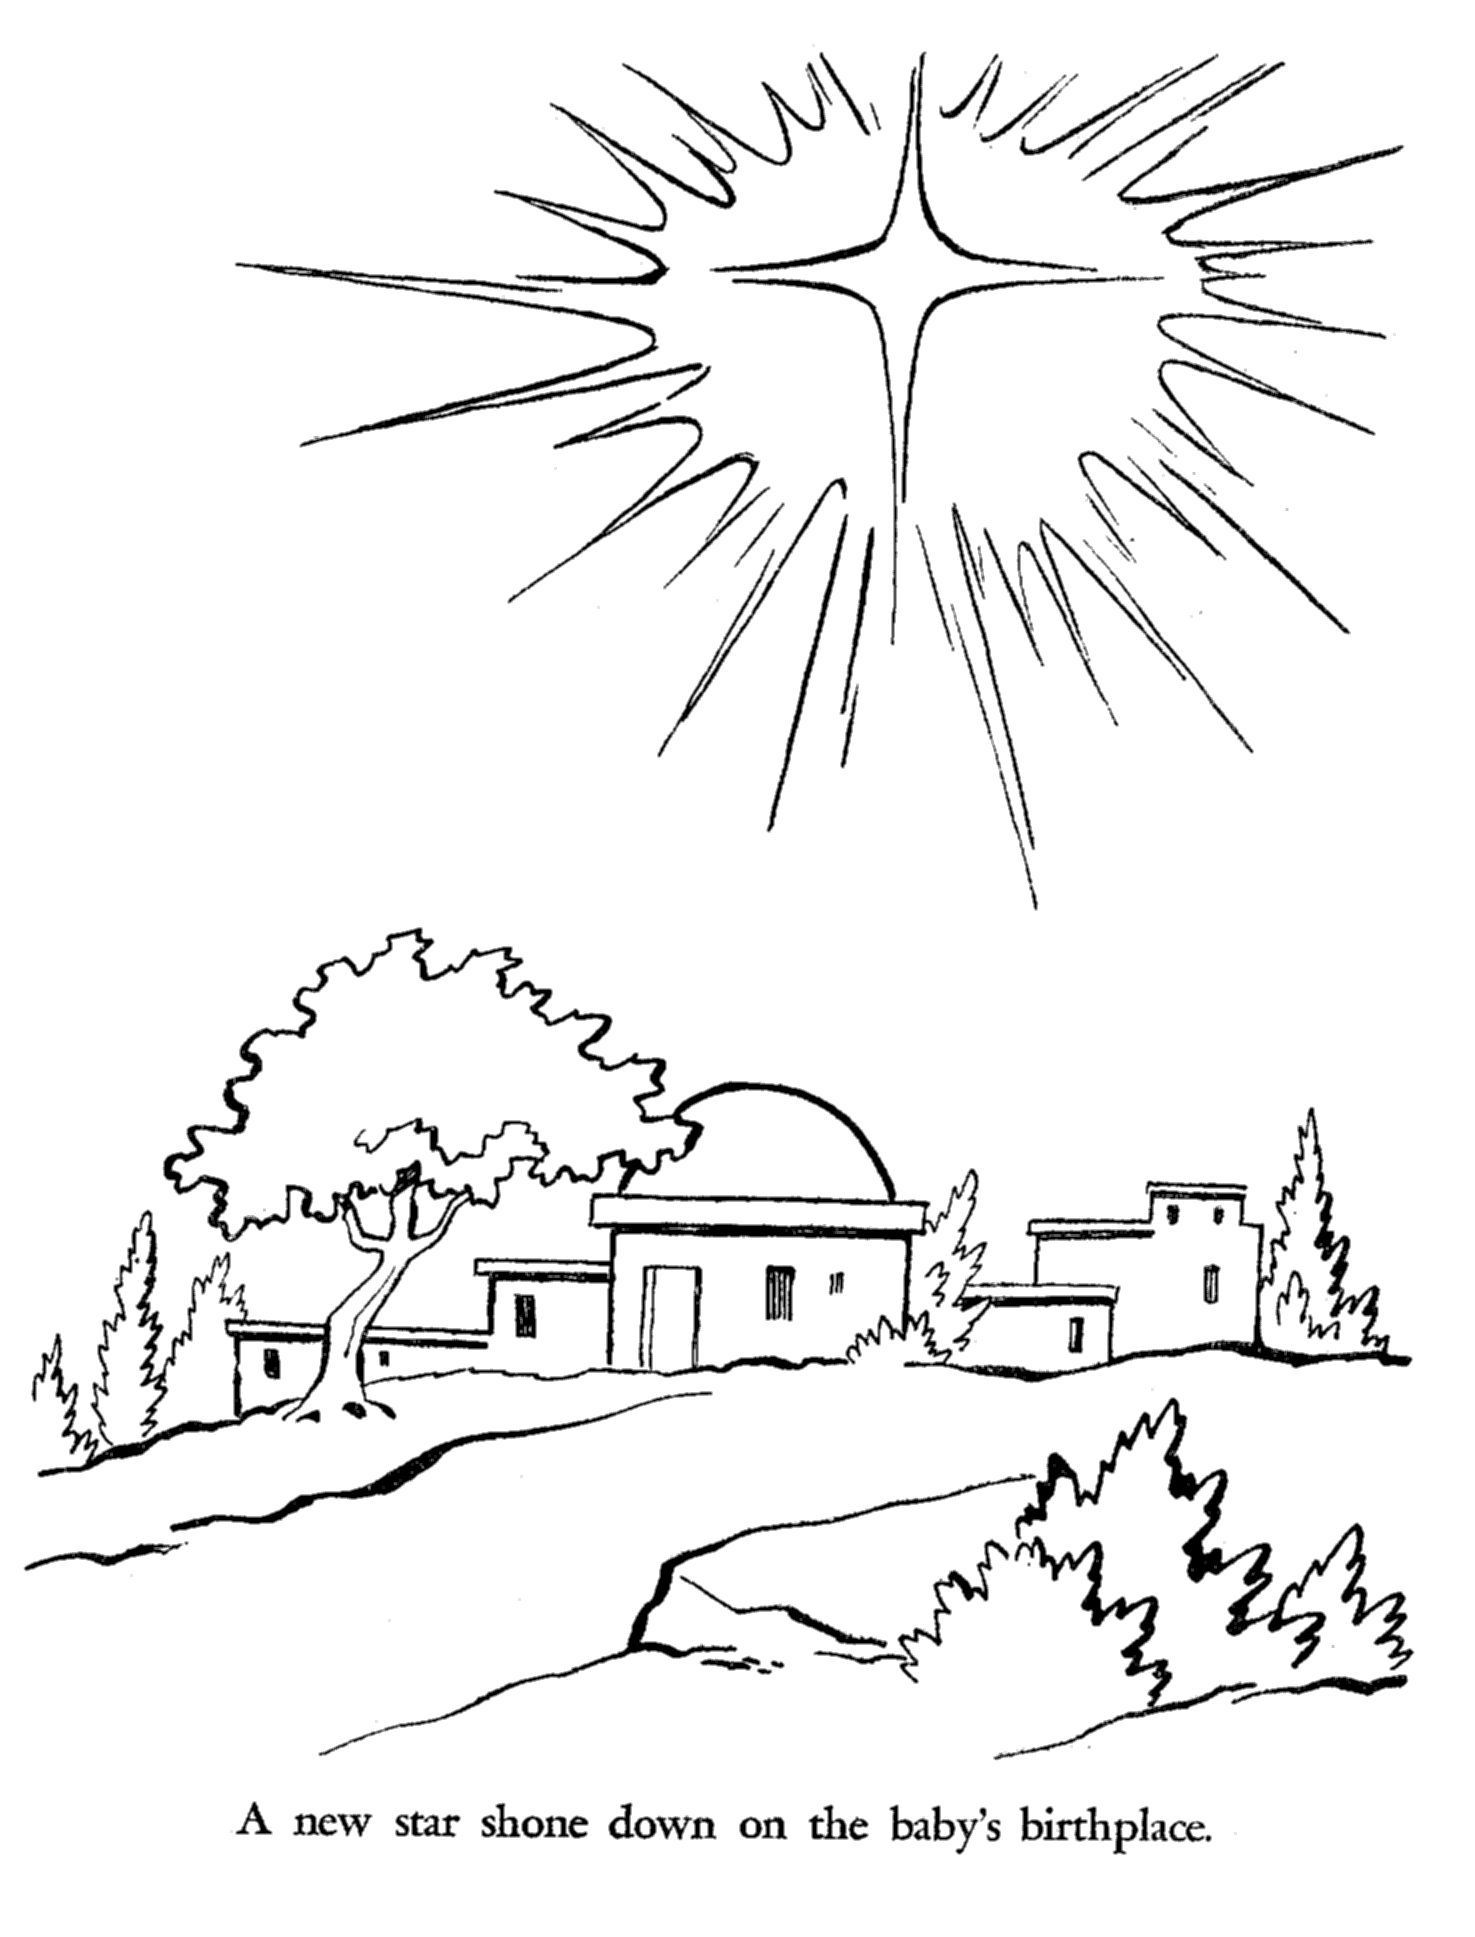 Christmas Bible Religious Coloring Page